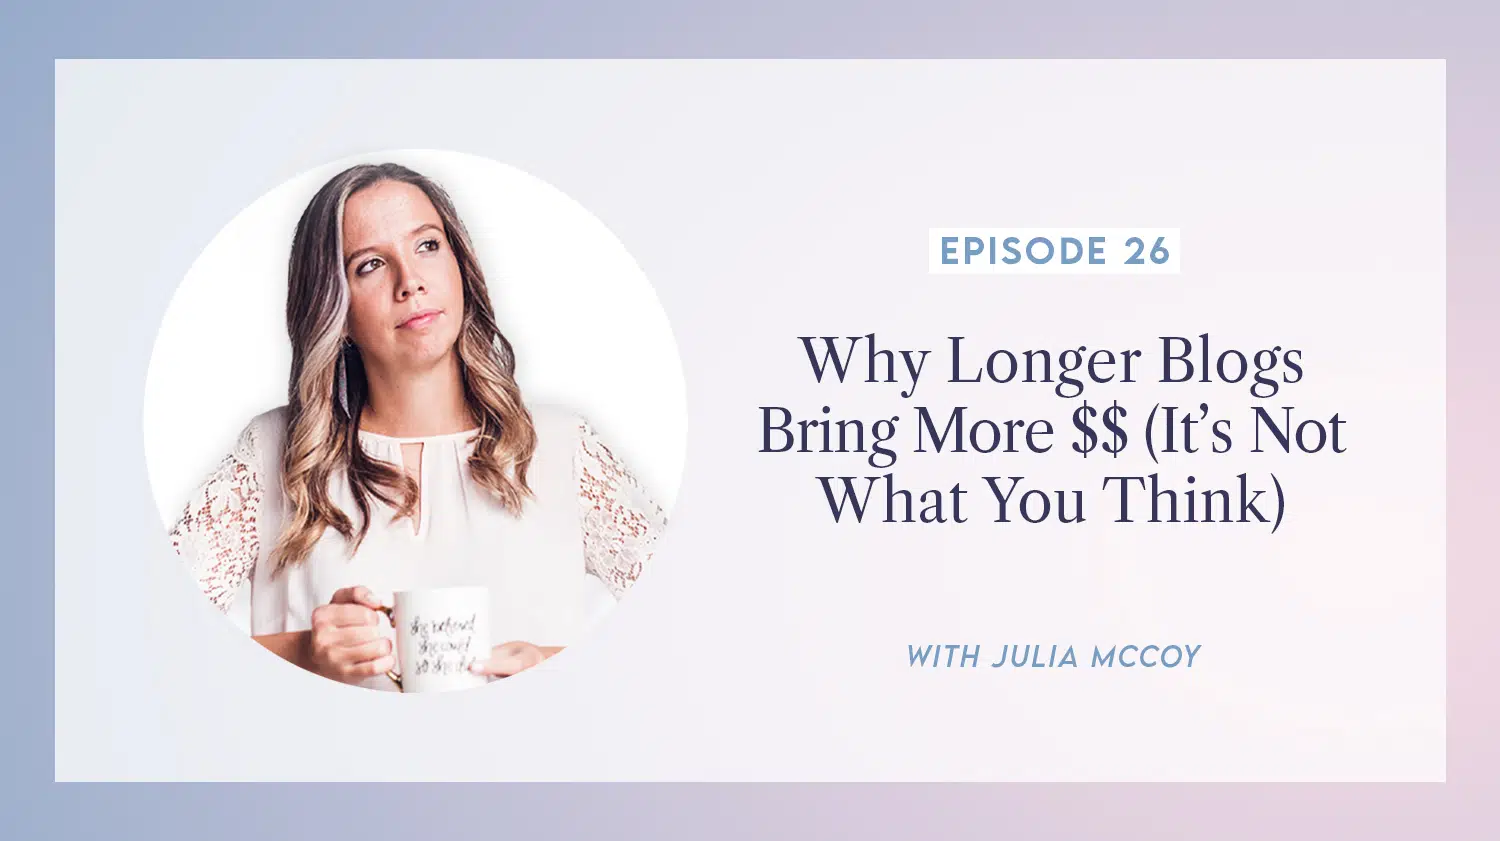 content transformation podcast with julia mccoy episode 26 why longer blogs bring more $$ (it’s not what you think)